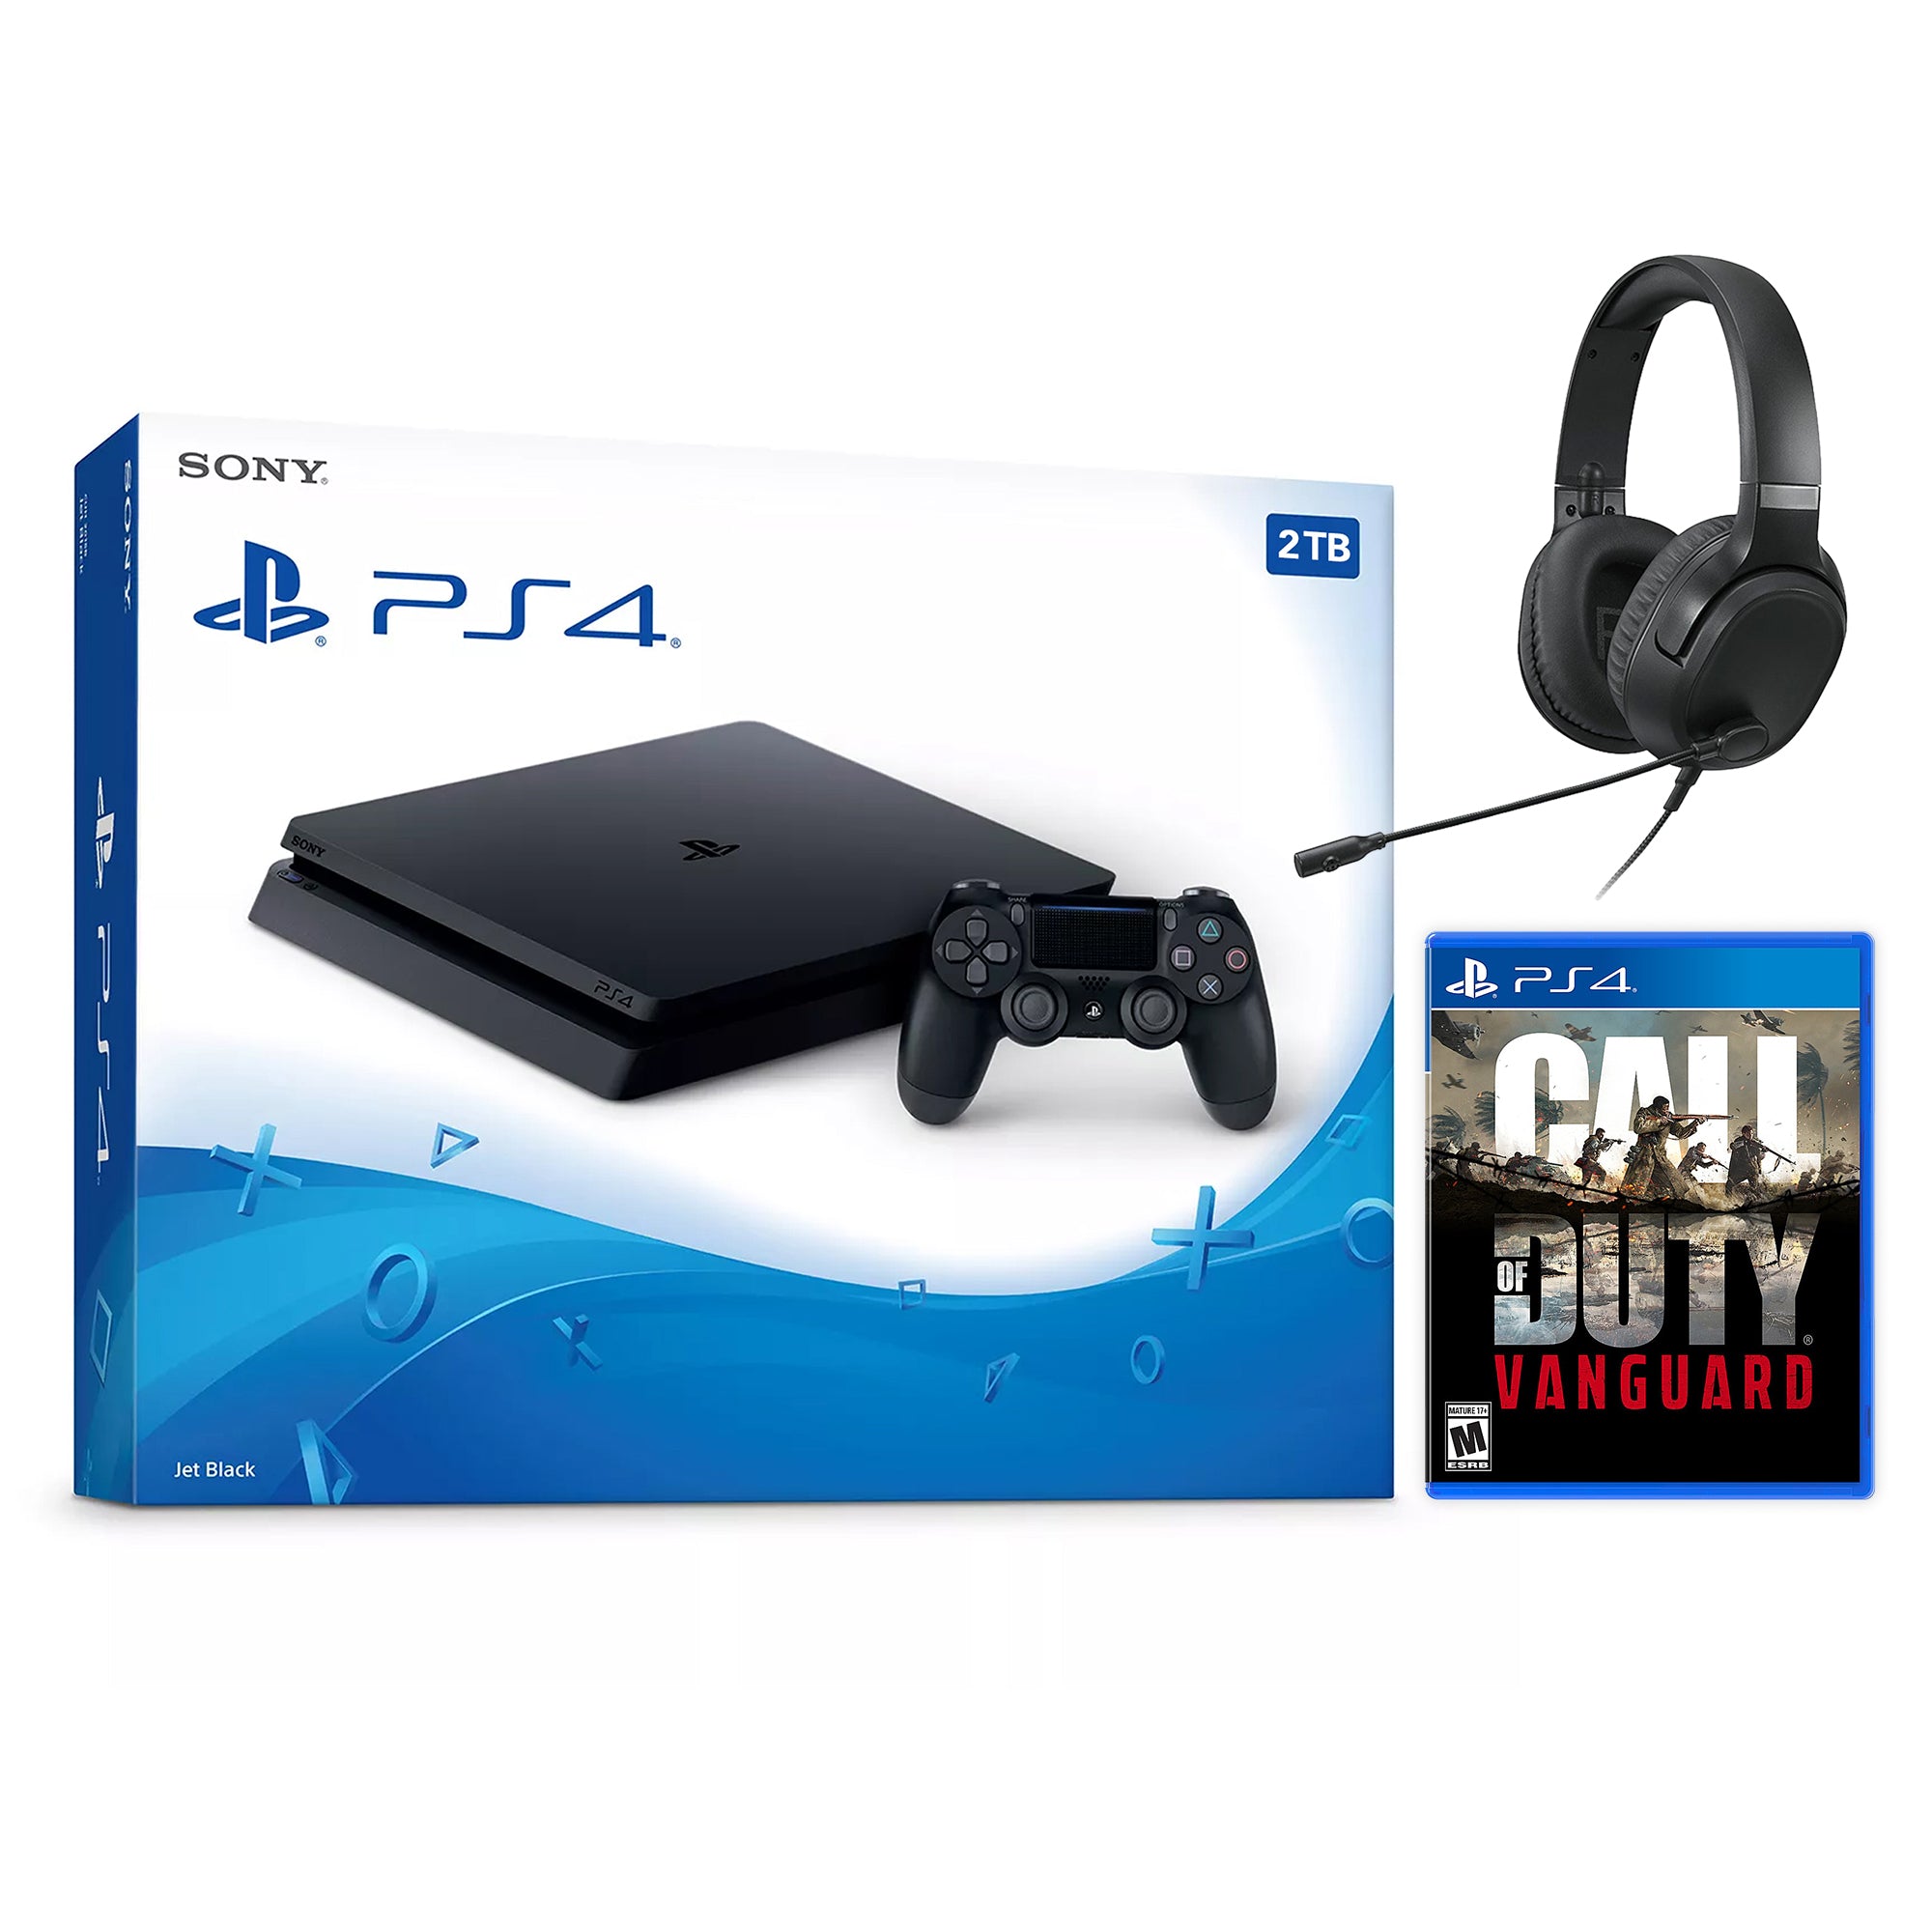 Sony PlayStation 4 Slim The Last of Us: Remastered Bundle Upgrade 2TB HDD PS4 Gaming Console, Jet Black, with Mytrix Chat Headset - Large Capacity Internal Hard Drive Enhanced PS4 Console